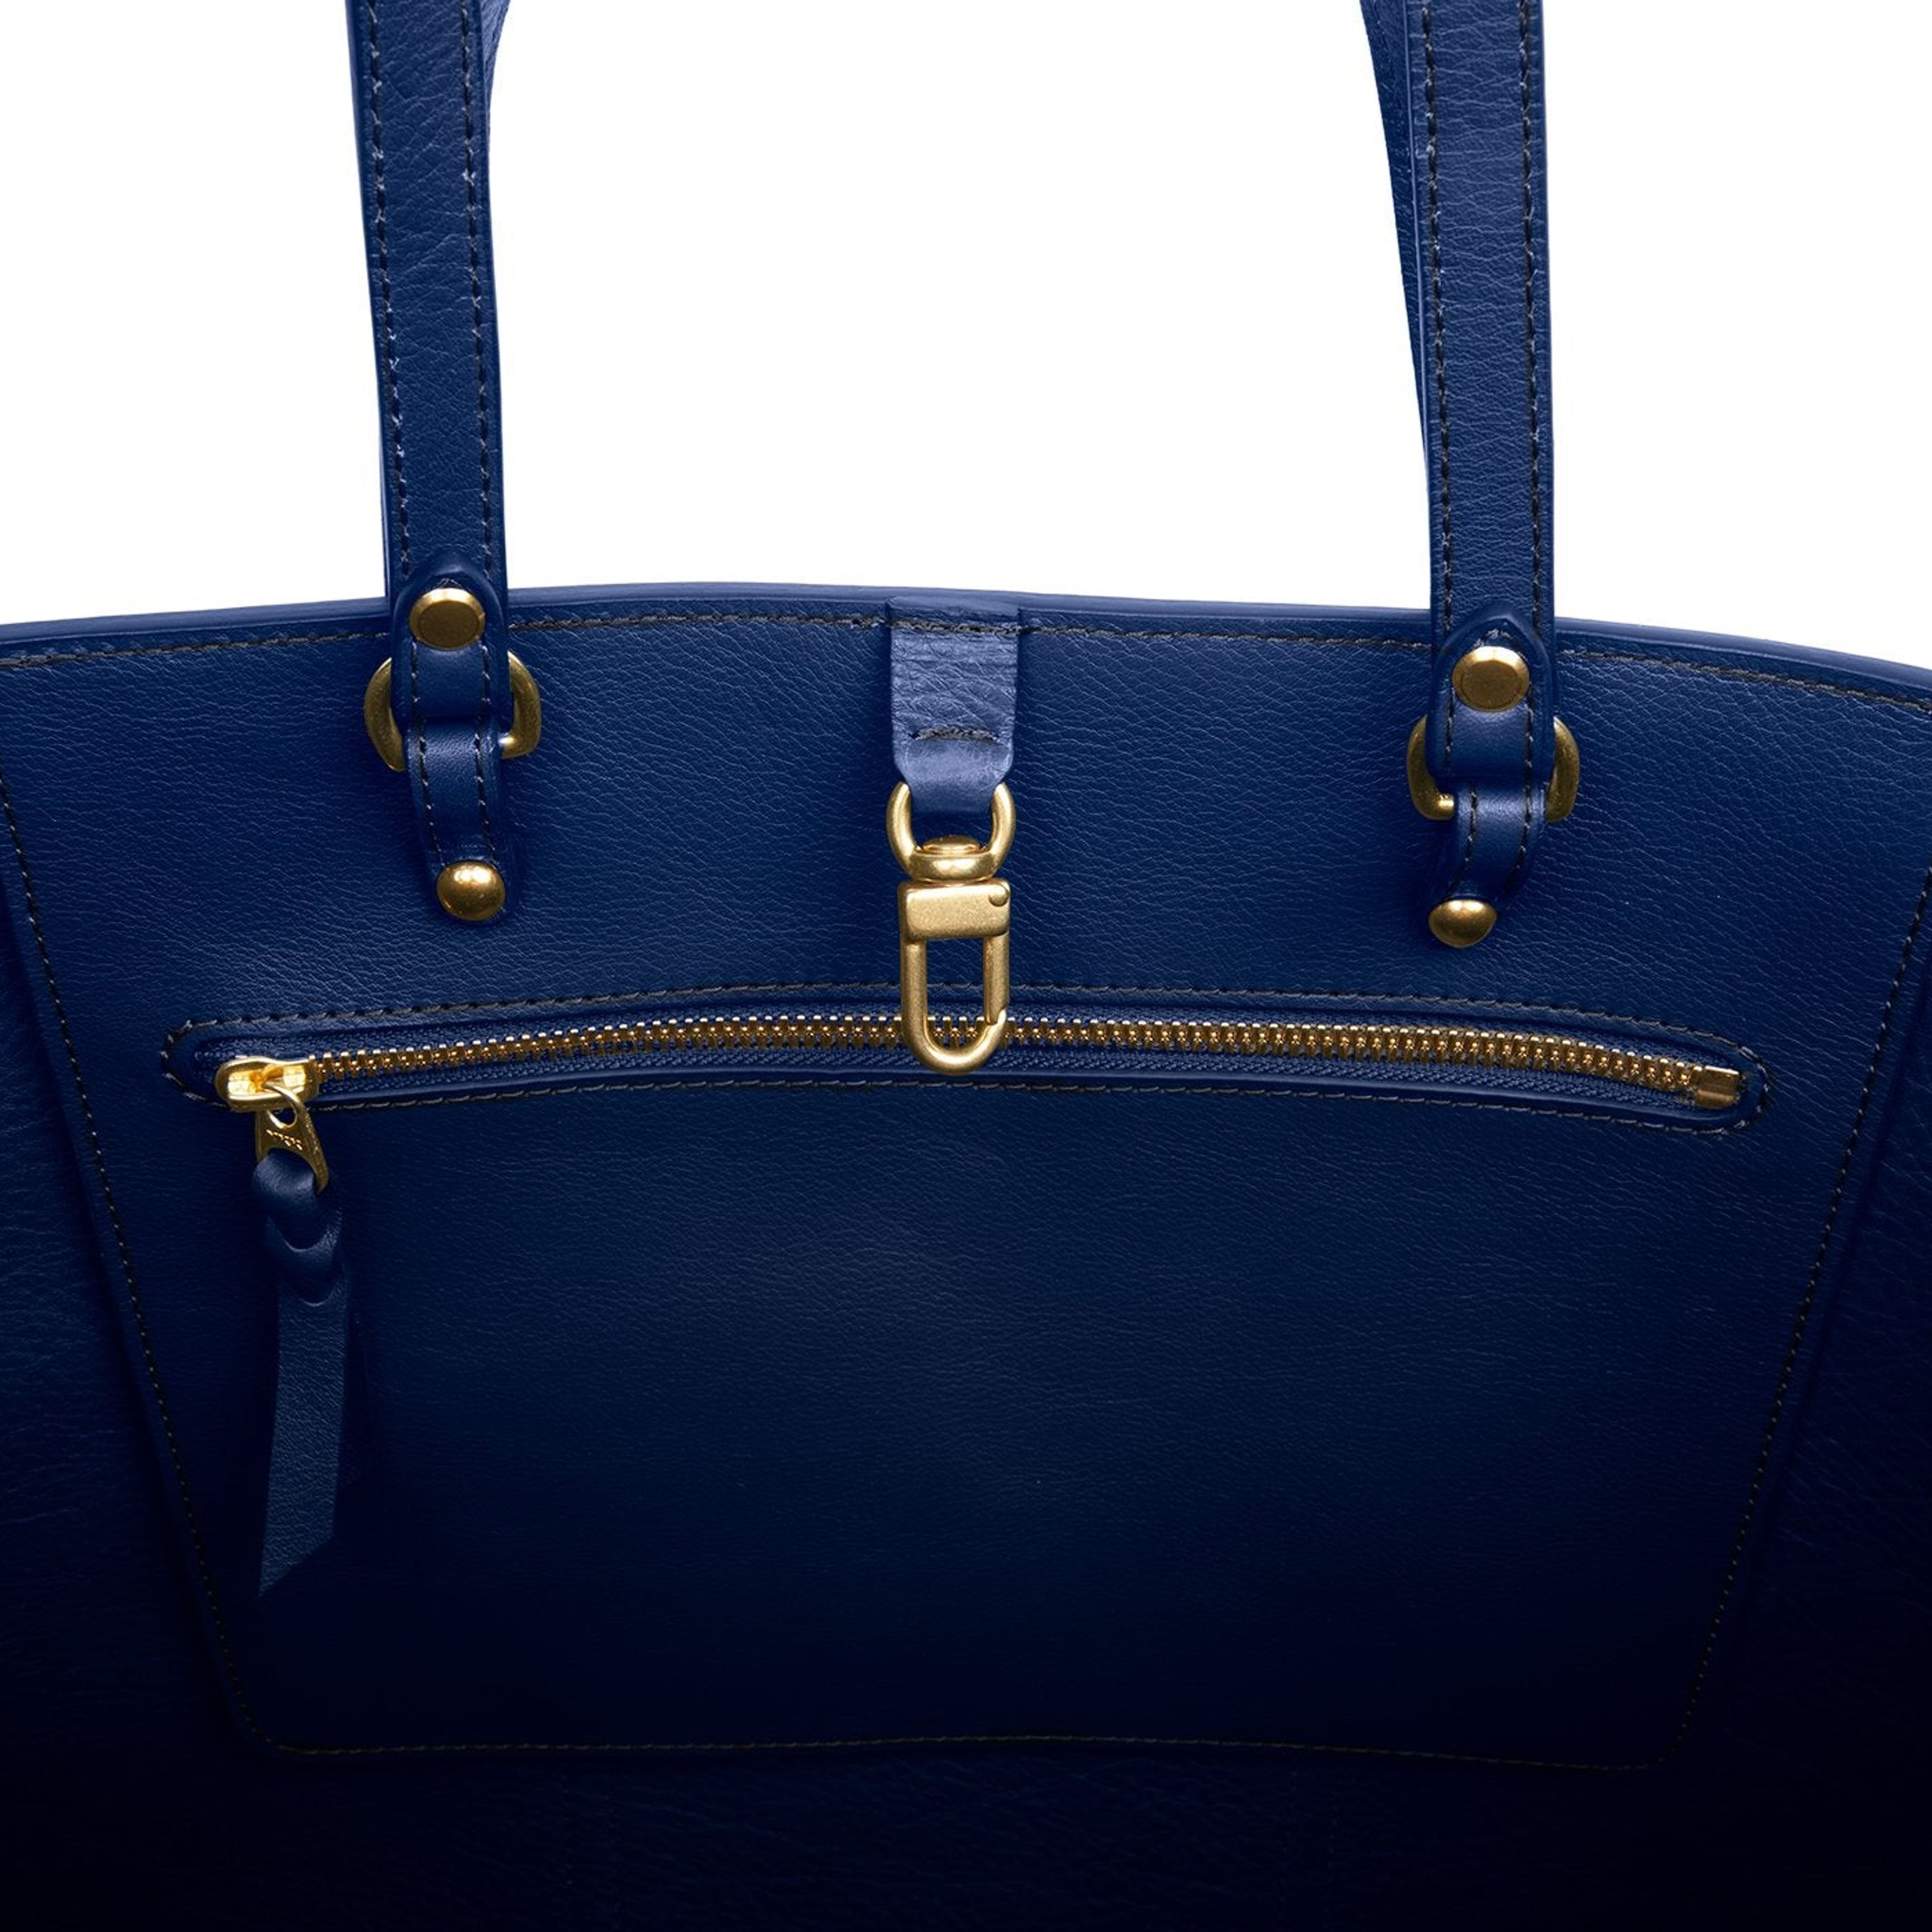 The Morris Leather Tote